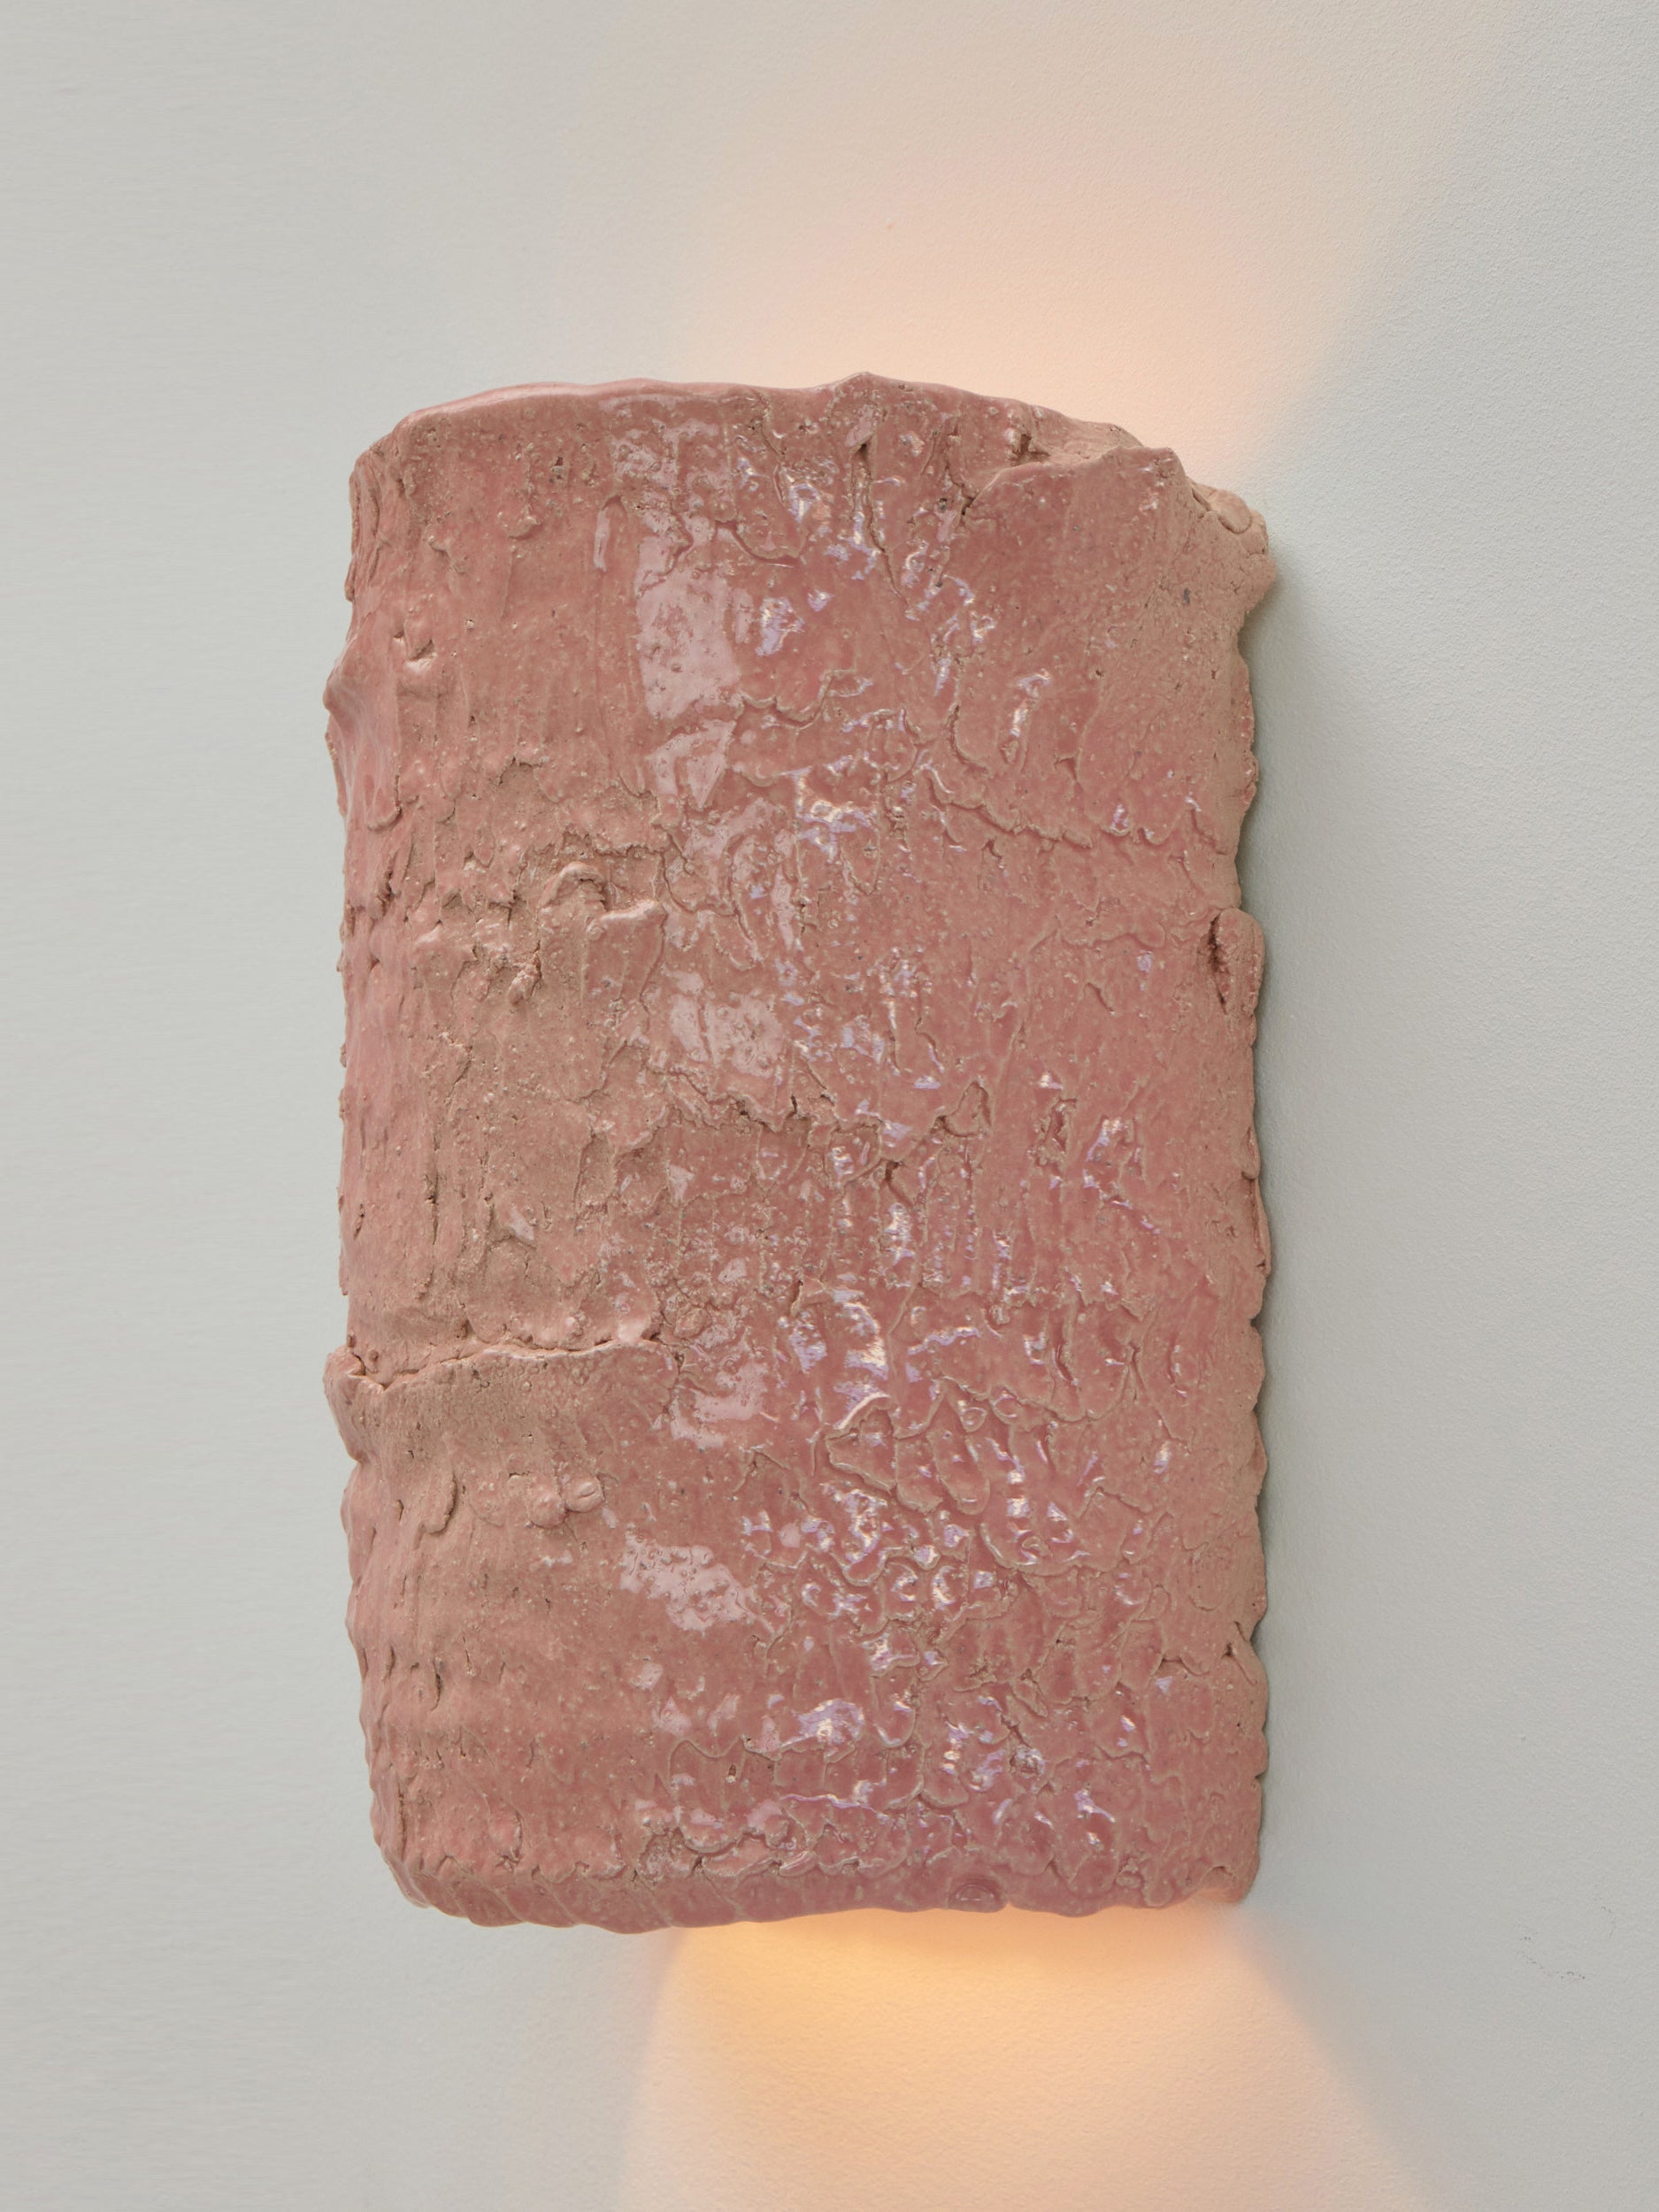 Casa Wall Light No 2 in Sorbet Pink Sconces